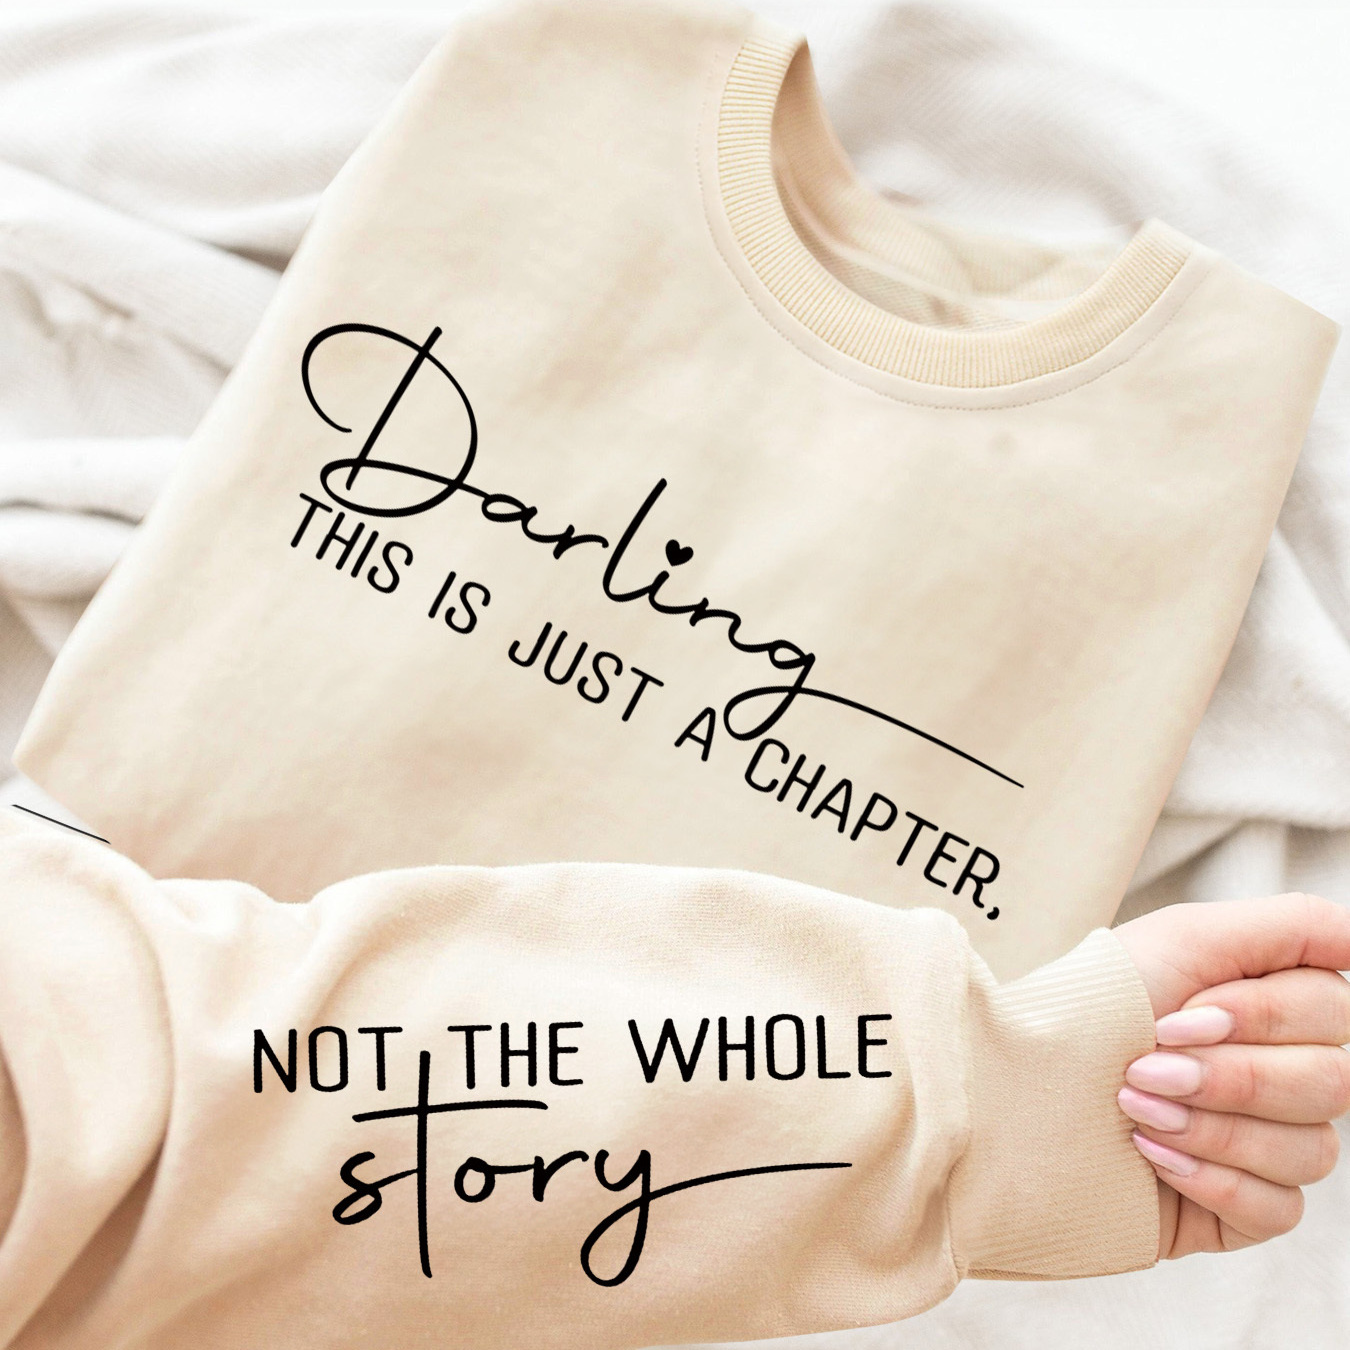 

Not The Whole Story Letter Print Sweatshirt, Crew Neck Casual Sweatshirt For Fall & Spring, Women's Clothing